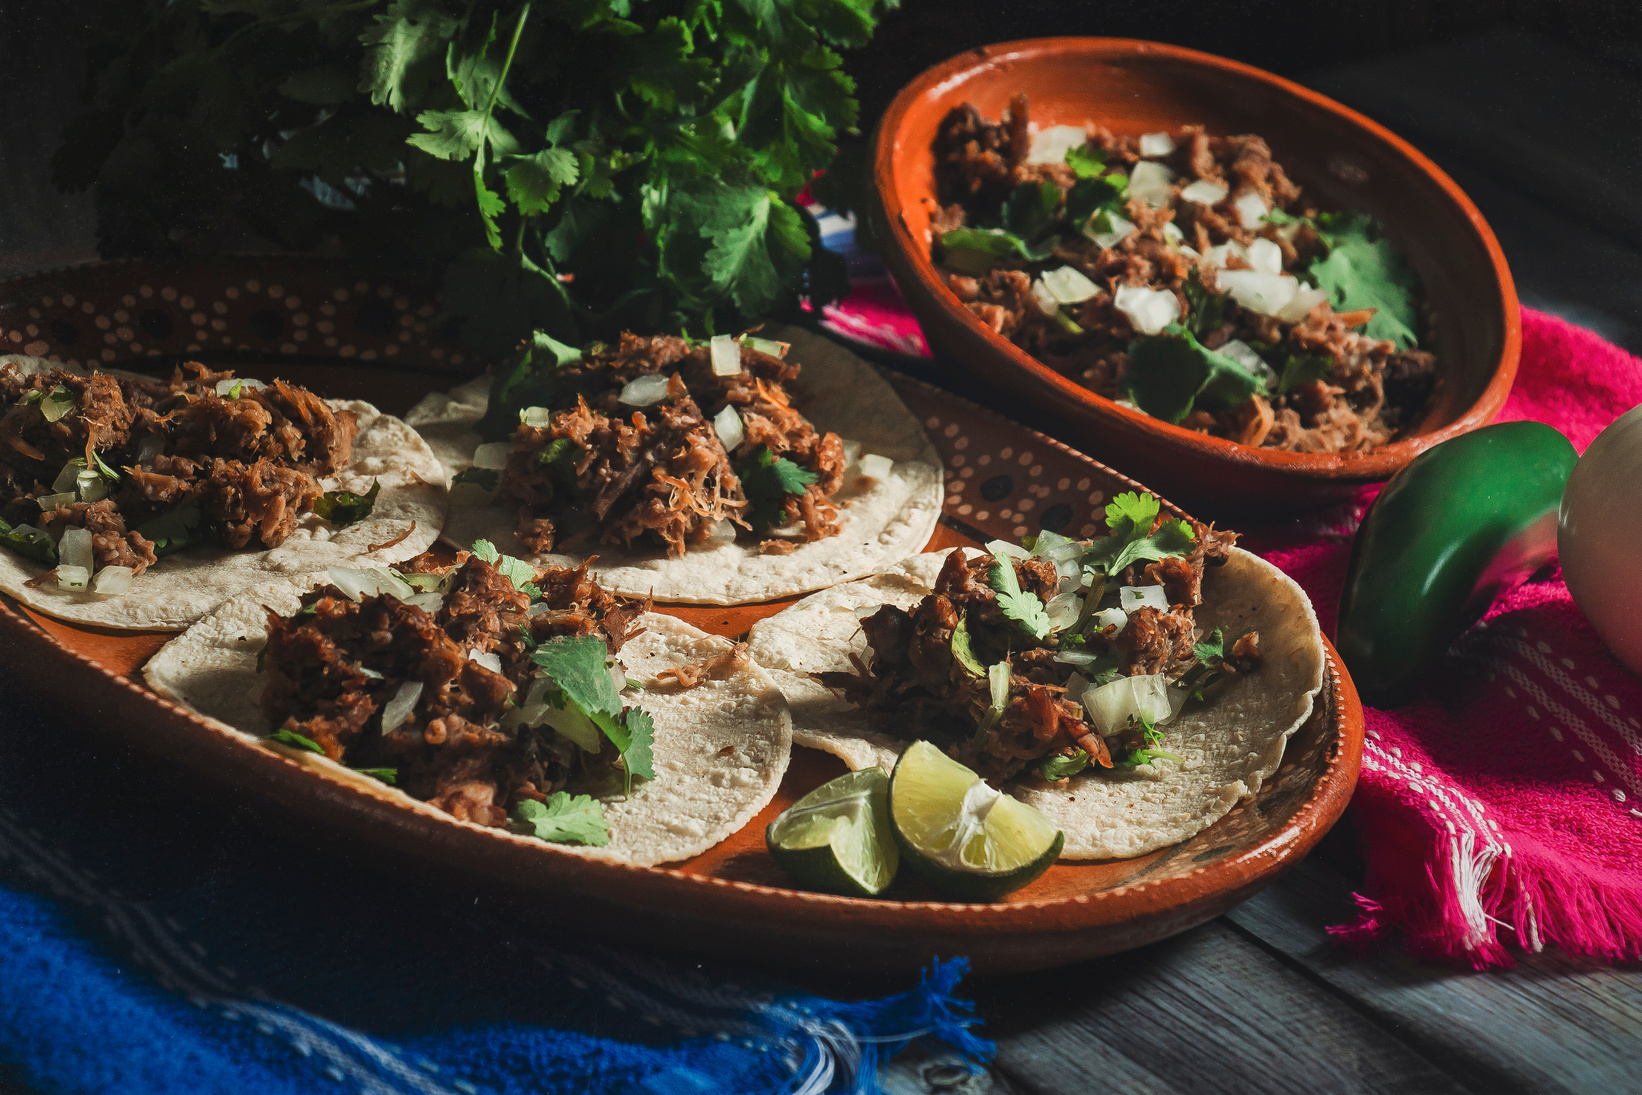 Tacos of Barbecue on Mexican Clay Plates on Tablecloths